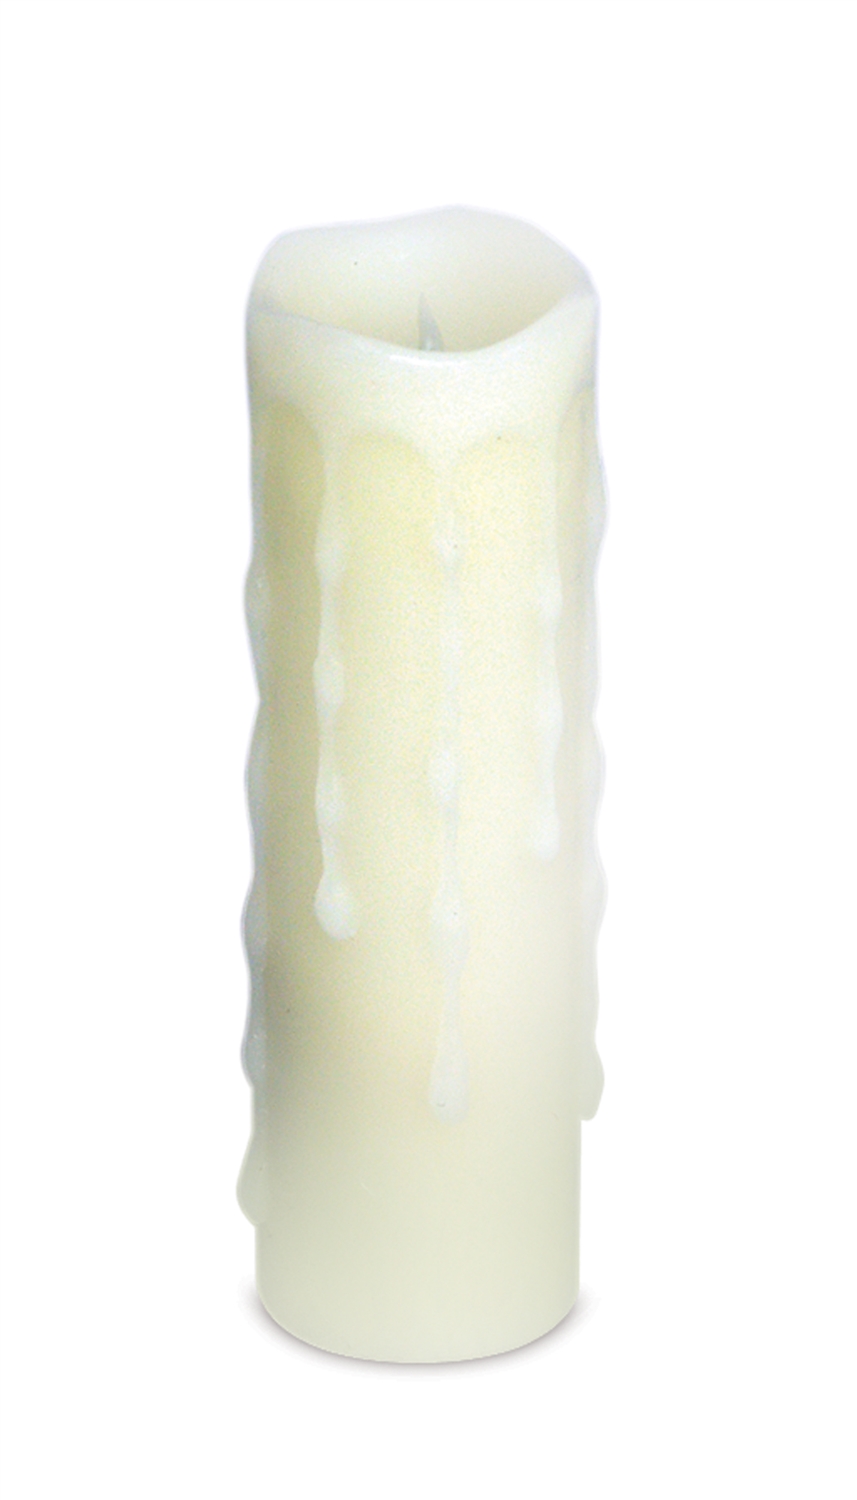 LED Wax Dripping Pillar Candle (Set of 6) 1.75"Dx6"H Wax/Plastic - 2 AA Batteries Not Incld